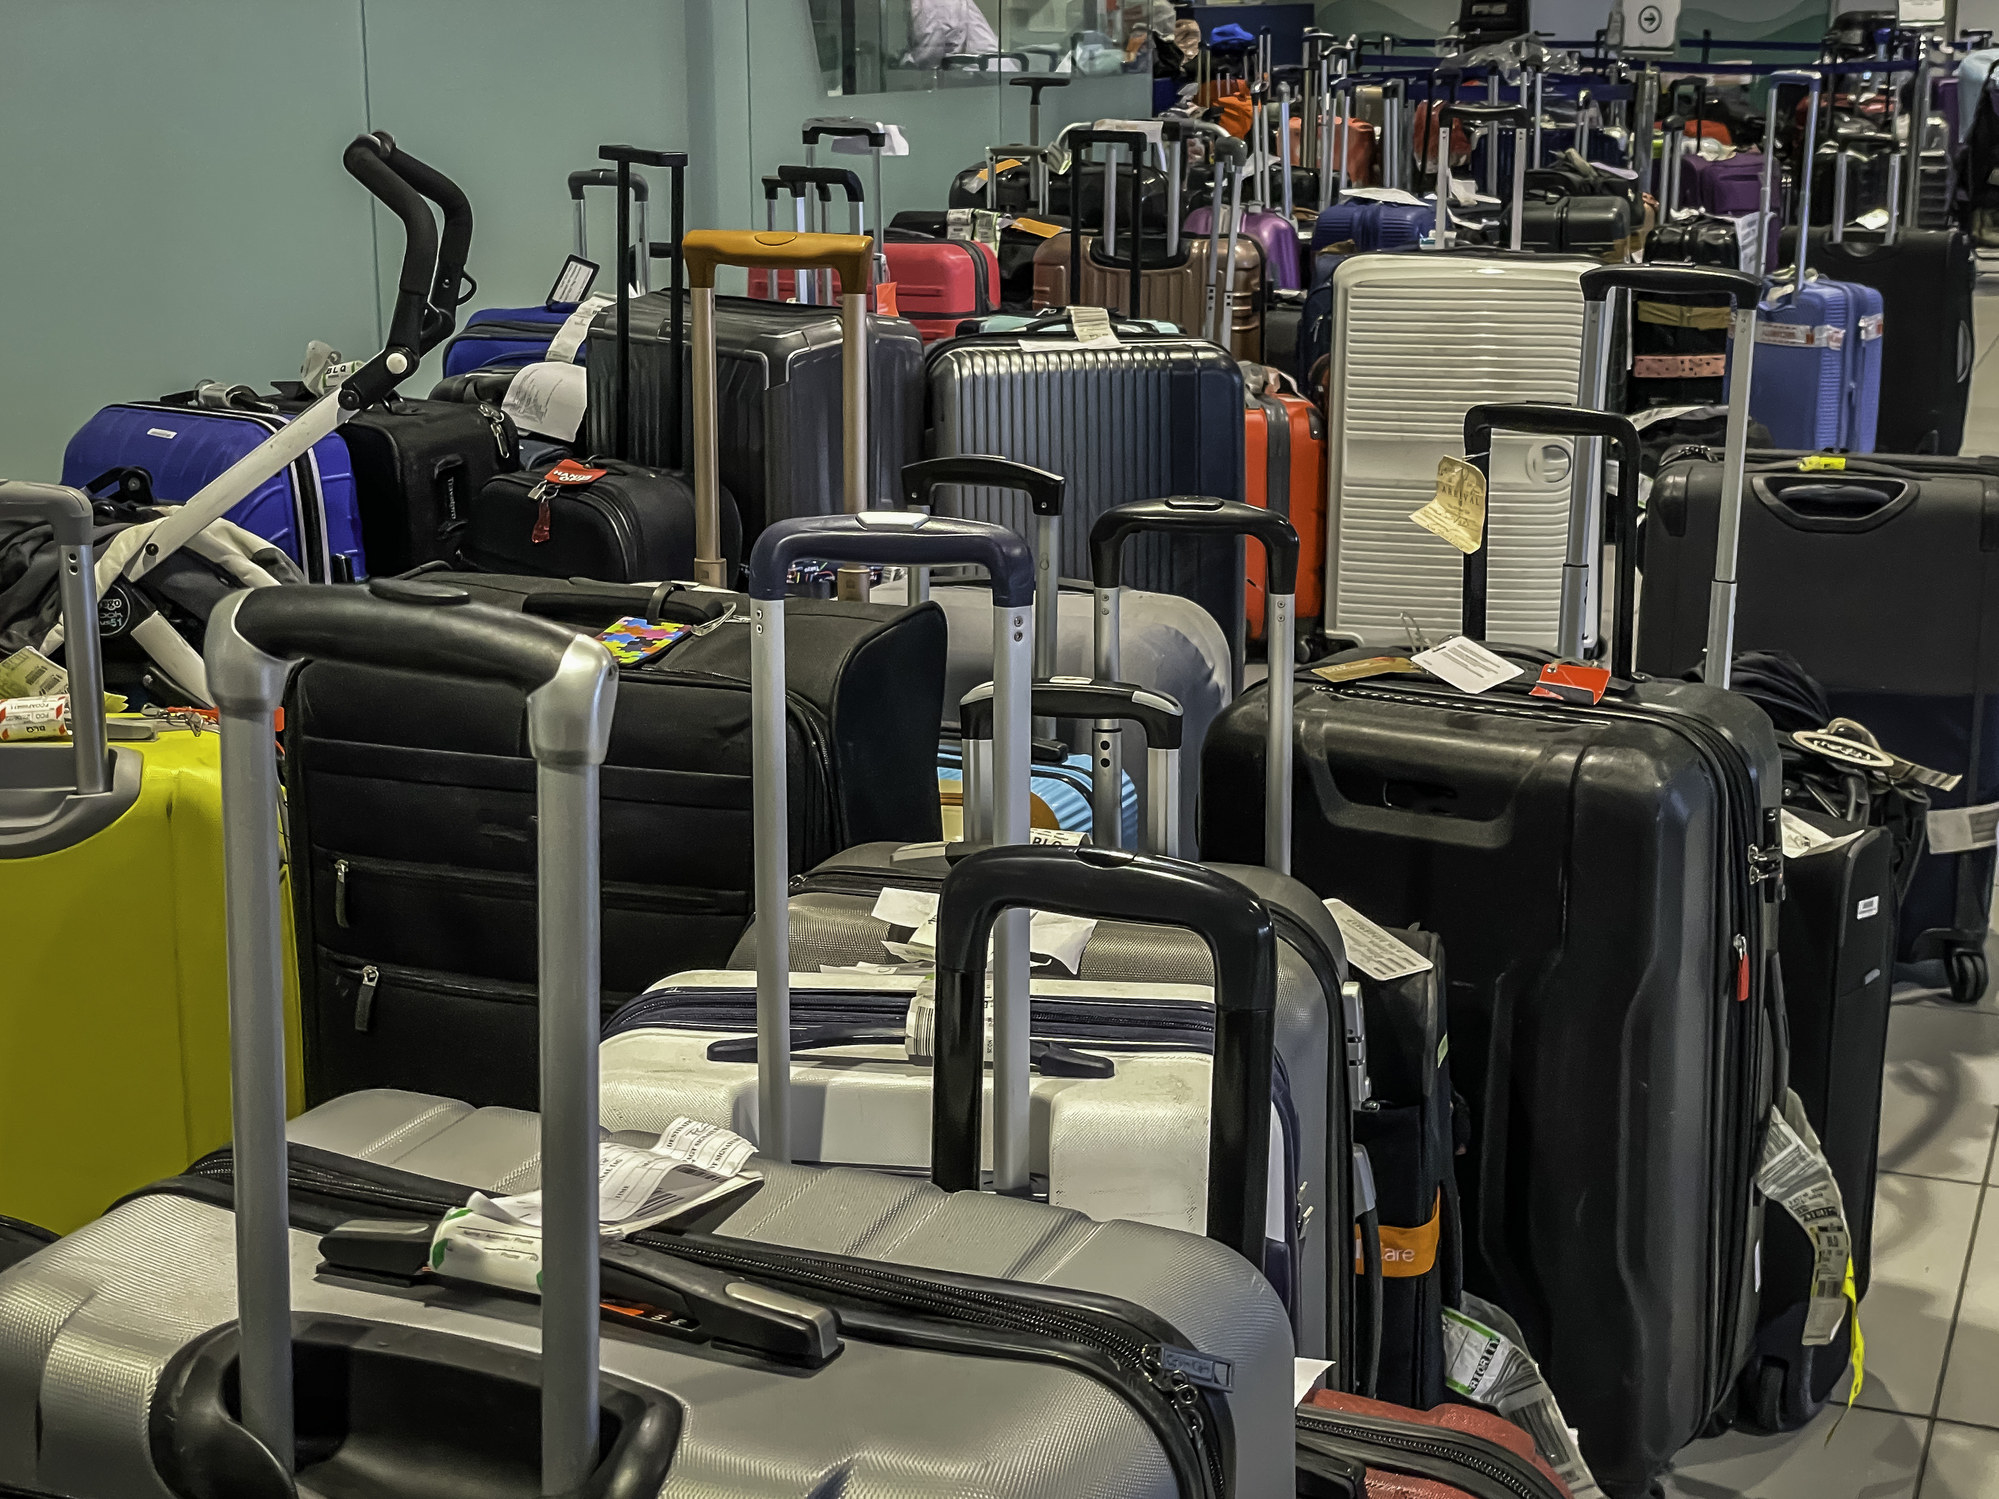 A large assortment of luggage with tags on them